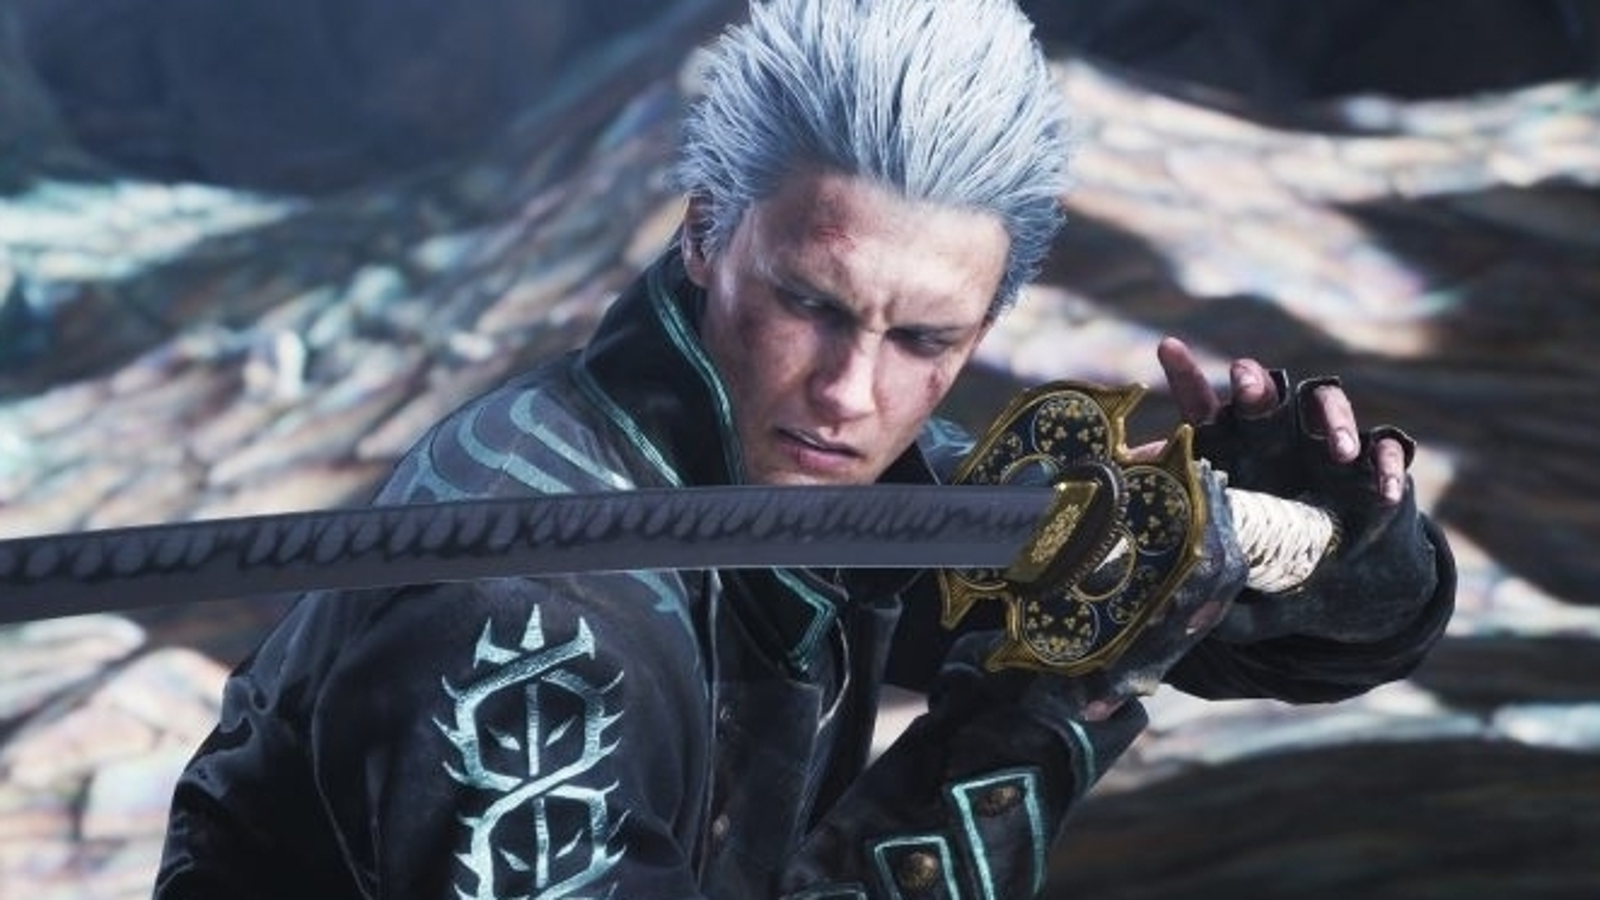 Vergil from devil may cry 5 by the eiffel tower